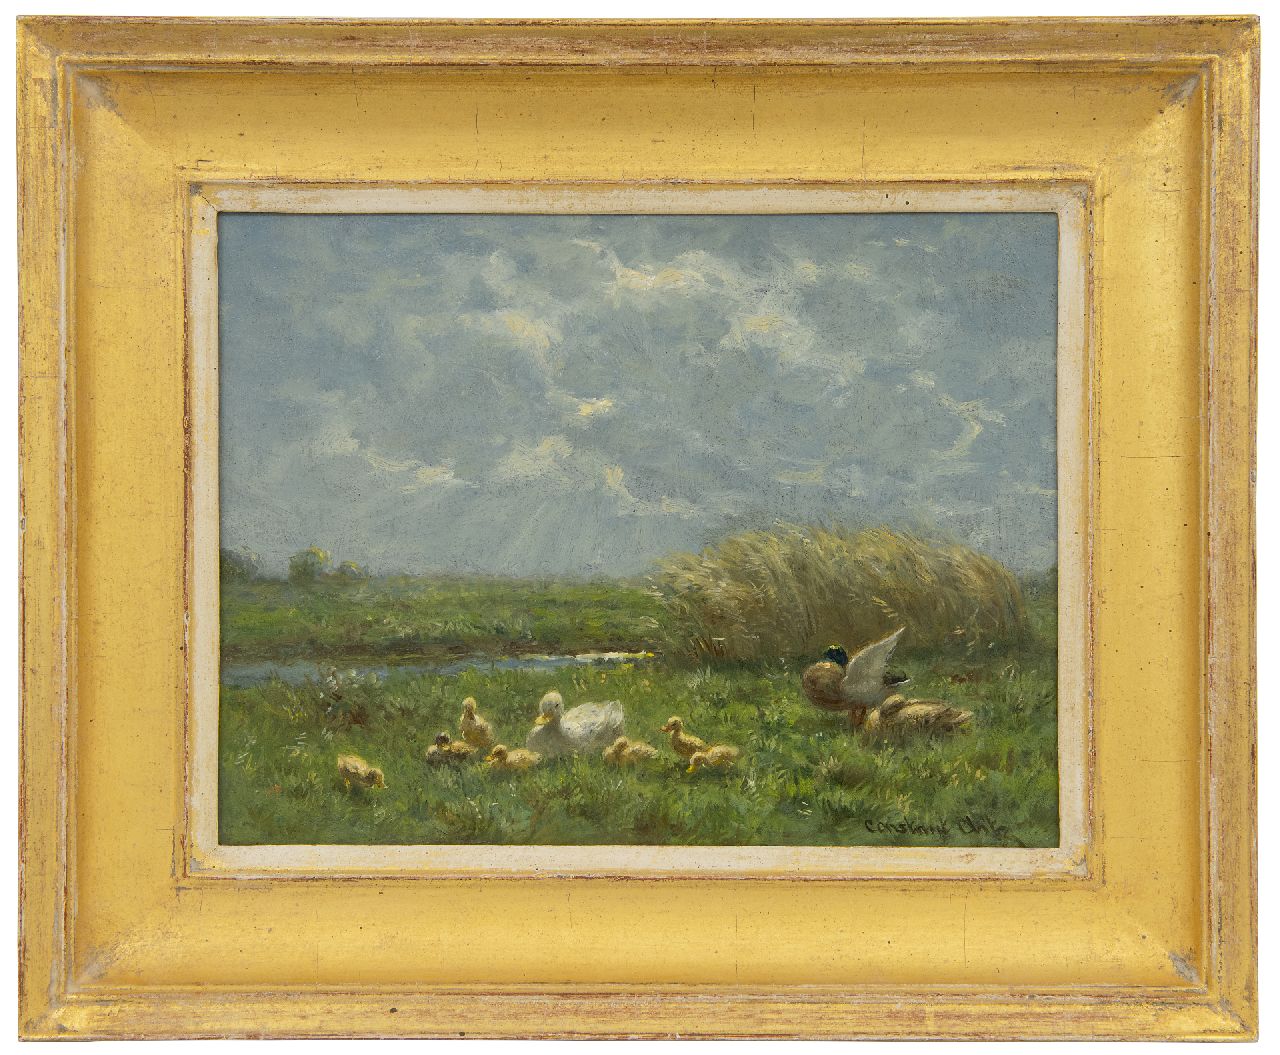 Artz C.D.L.  | 'Constant' David Ludovic Artz | Paintings offered for sale | Duck family in a polder landscape, oil on panel 18.1 x 24.1 cm, signed l.r.